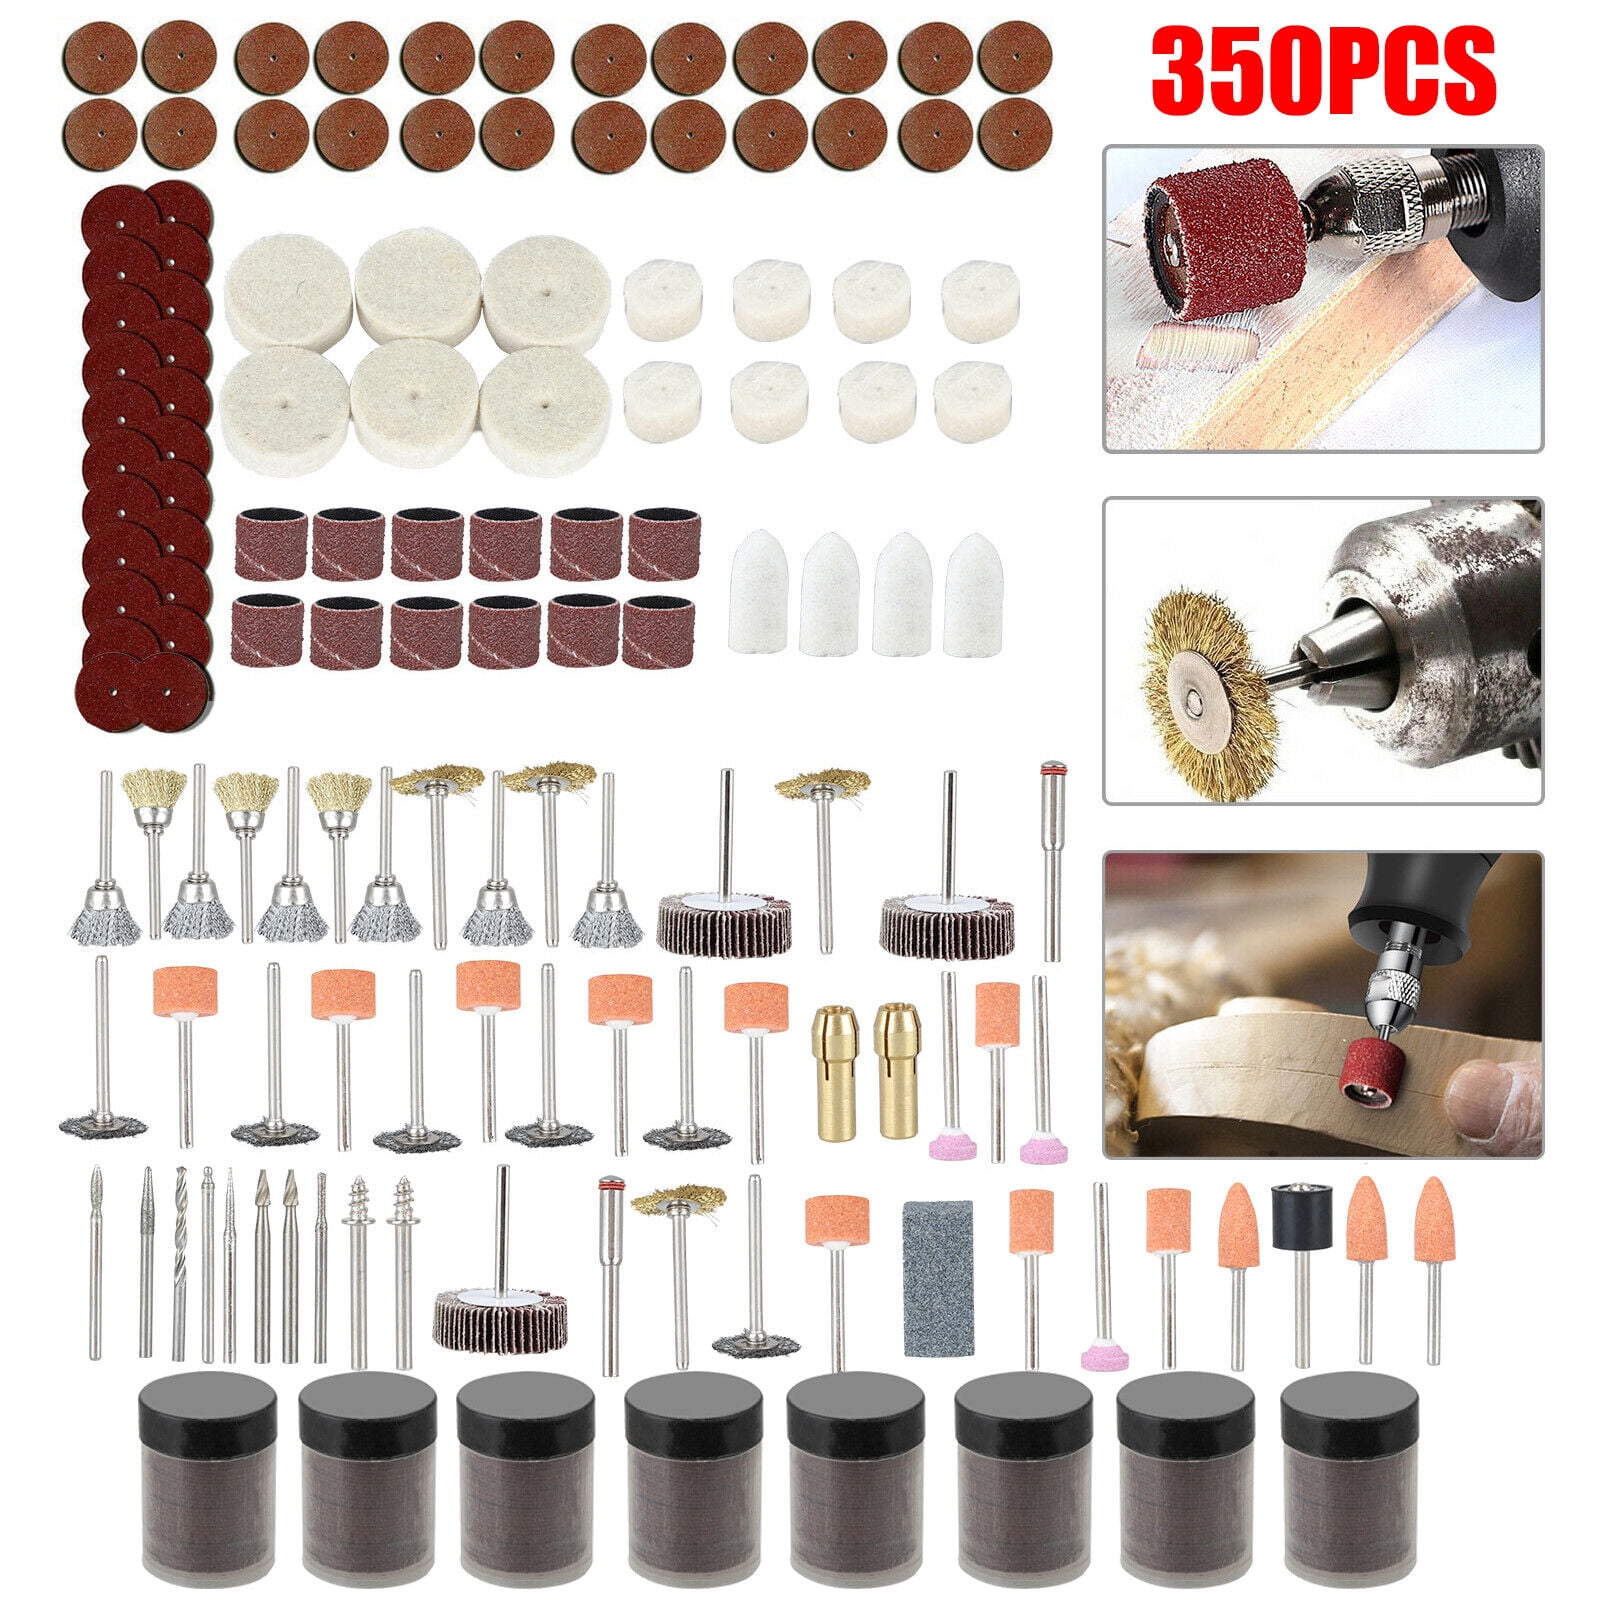 3x ROTARY TOOL GRINDING STONE SET DIY Craft Drill Bits For Metal